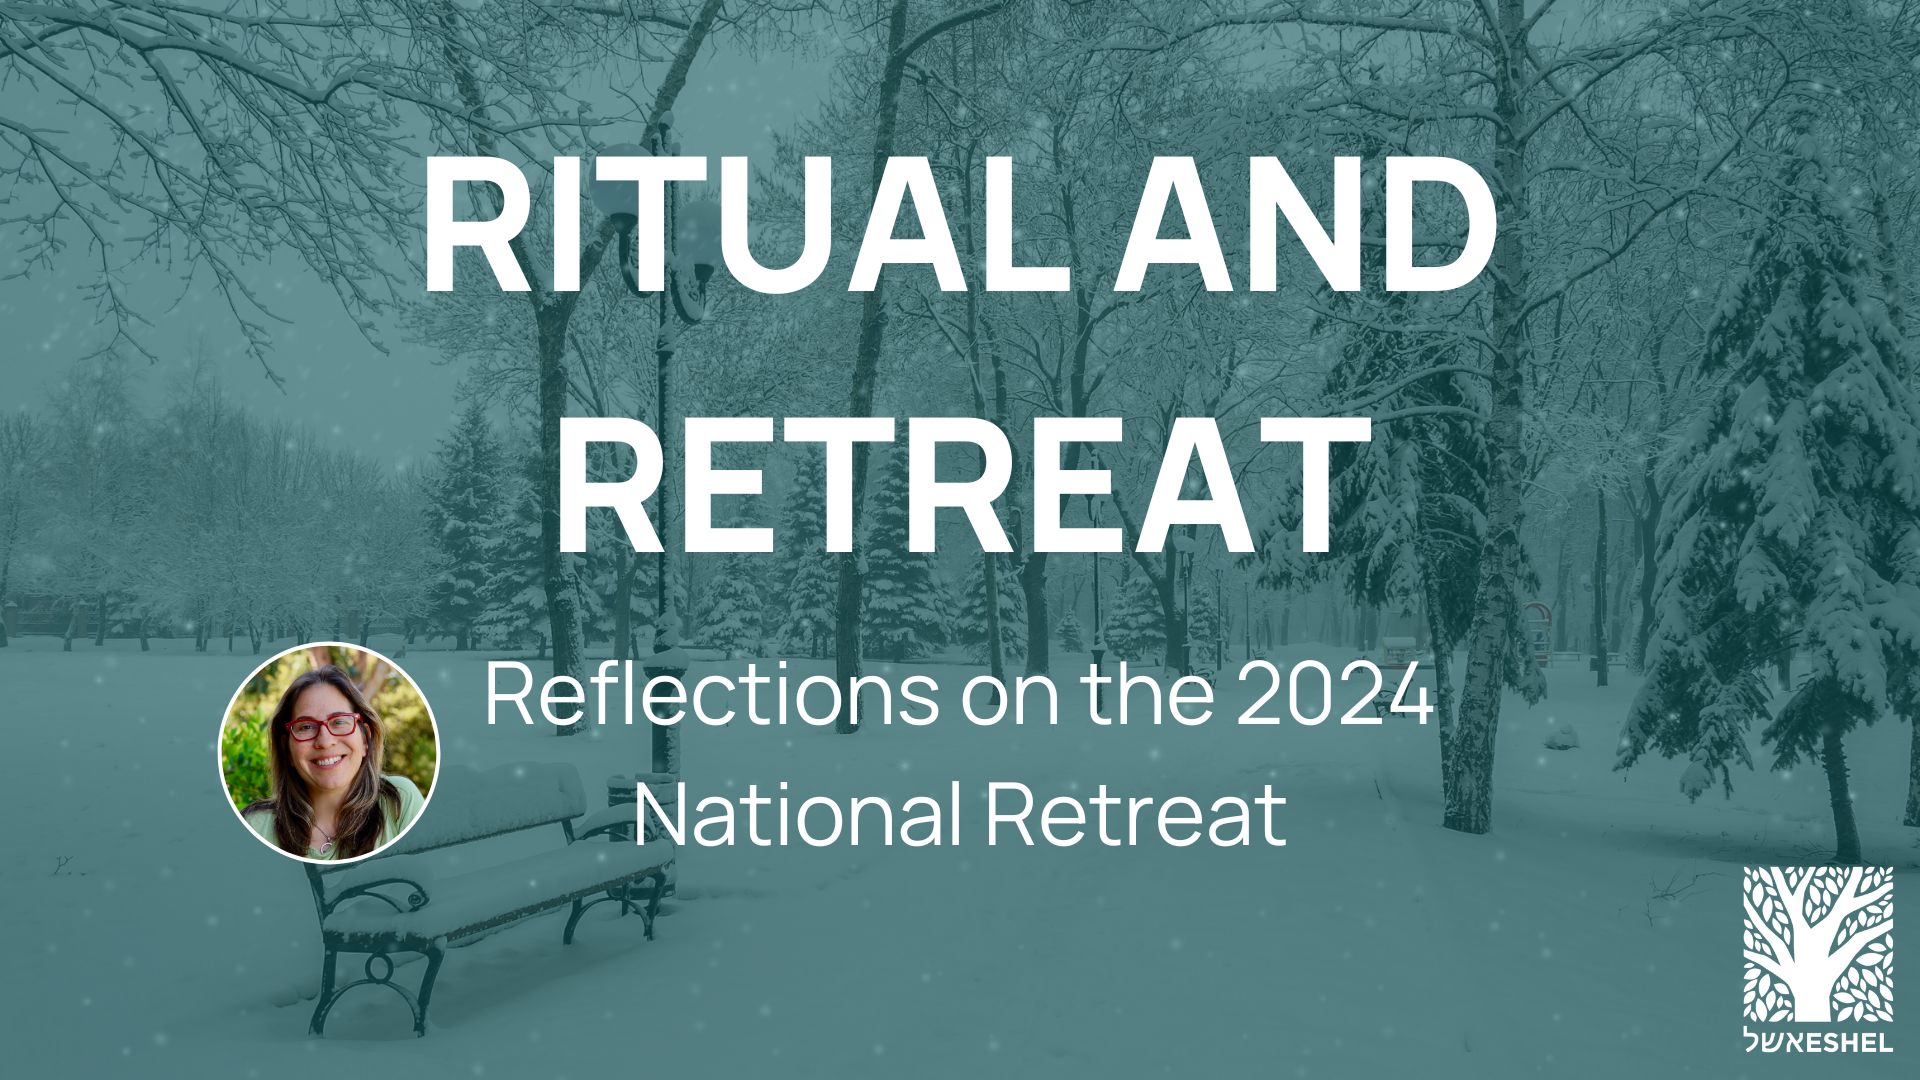 Ritual and Retreat: Reflections on the 2024 National Retreat